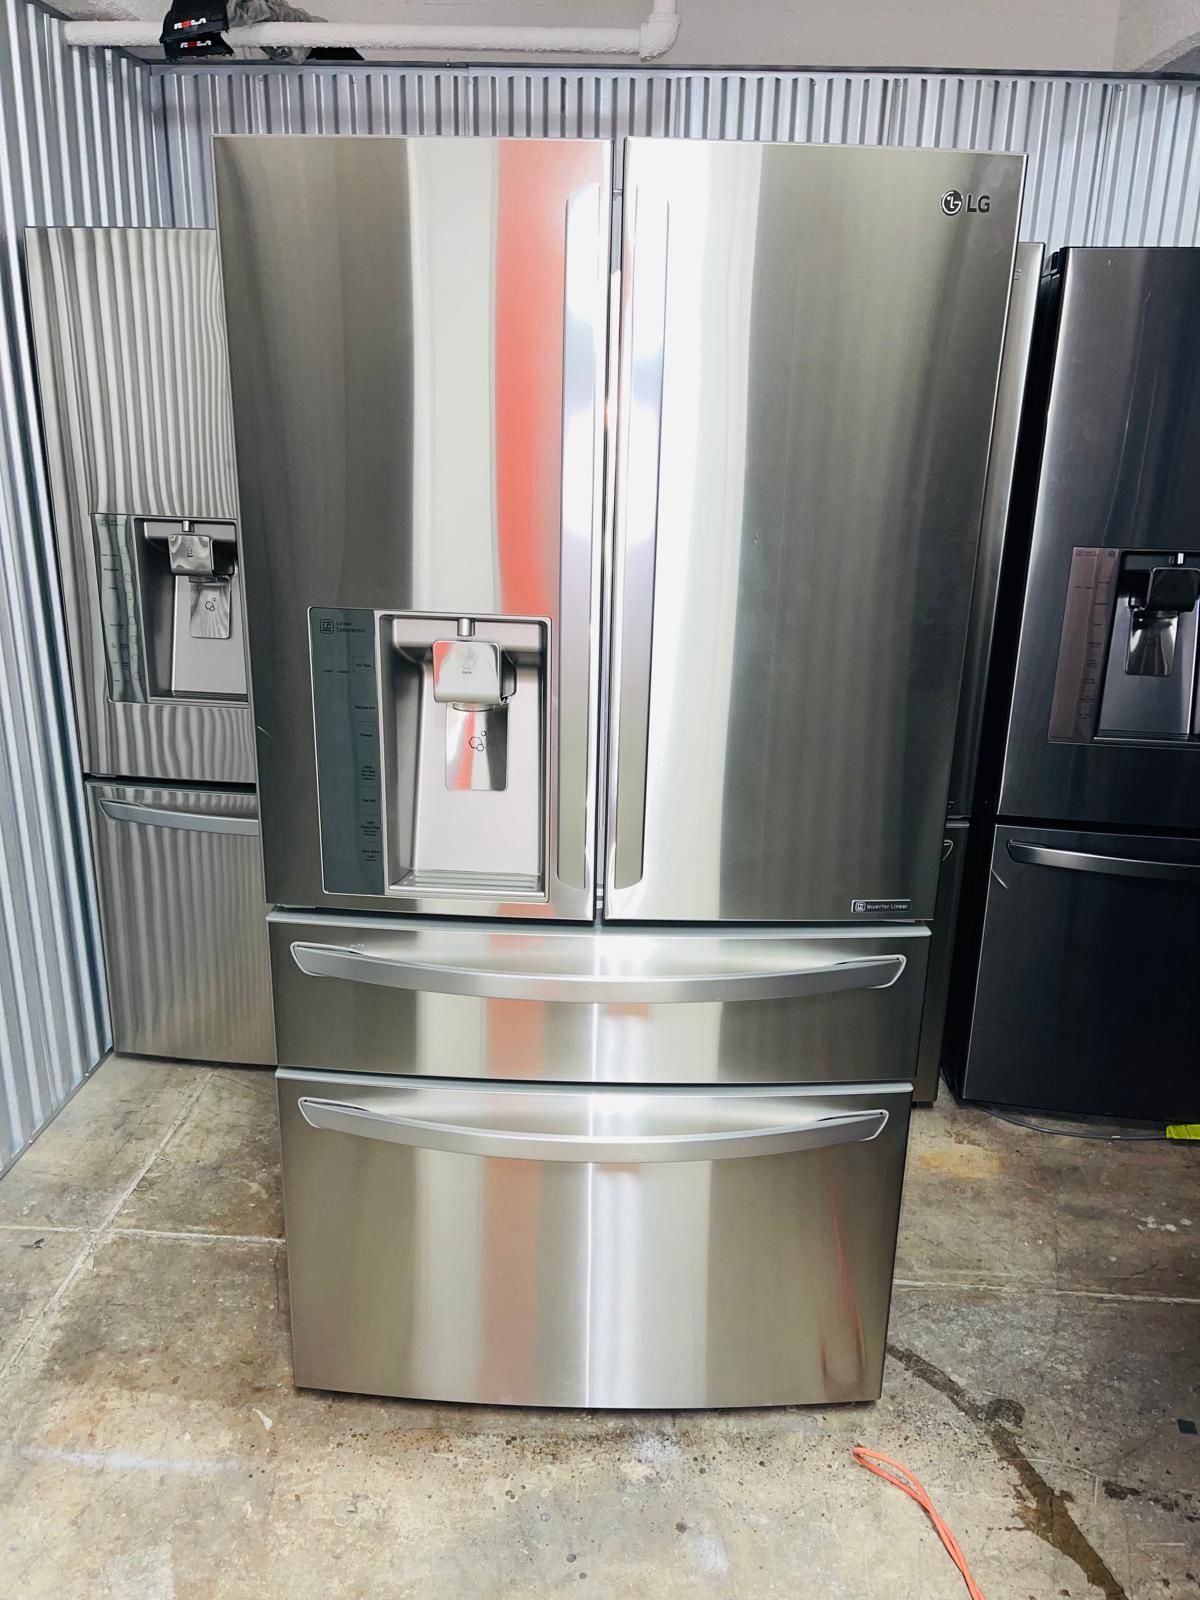 LG refrigerator 36X69X24 stainless steel in very perfect condition a receipt for 90 days warranty